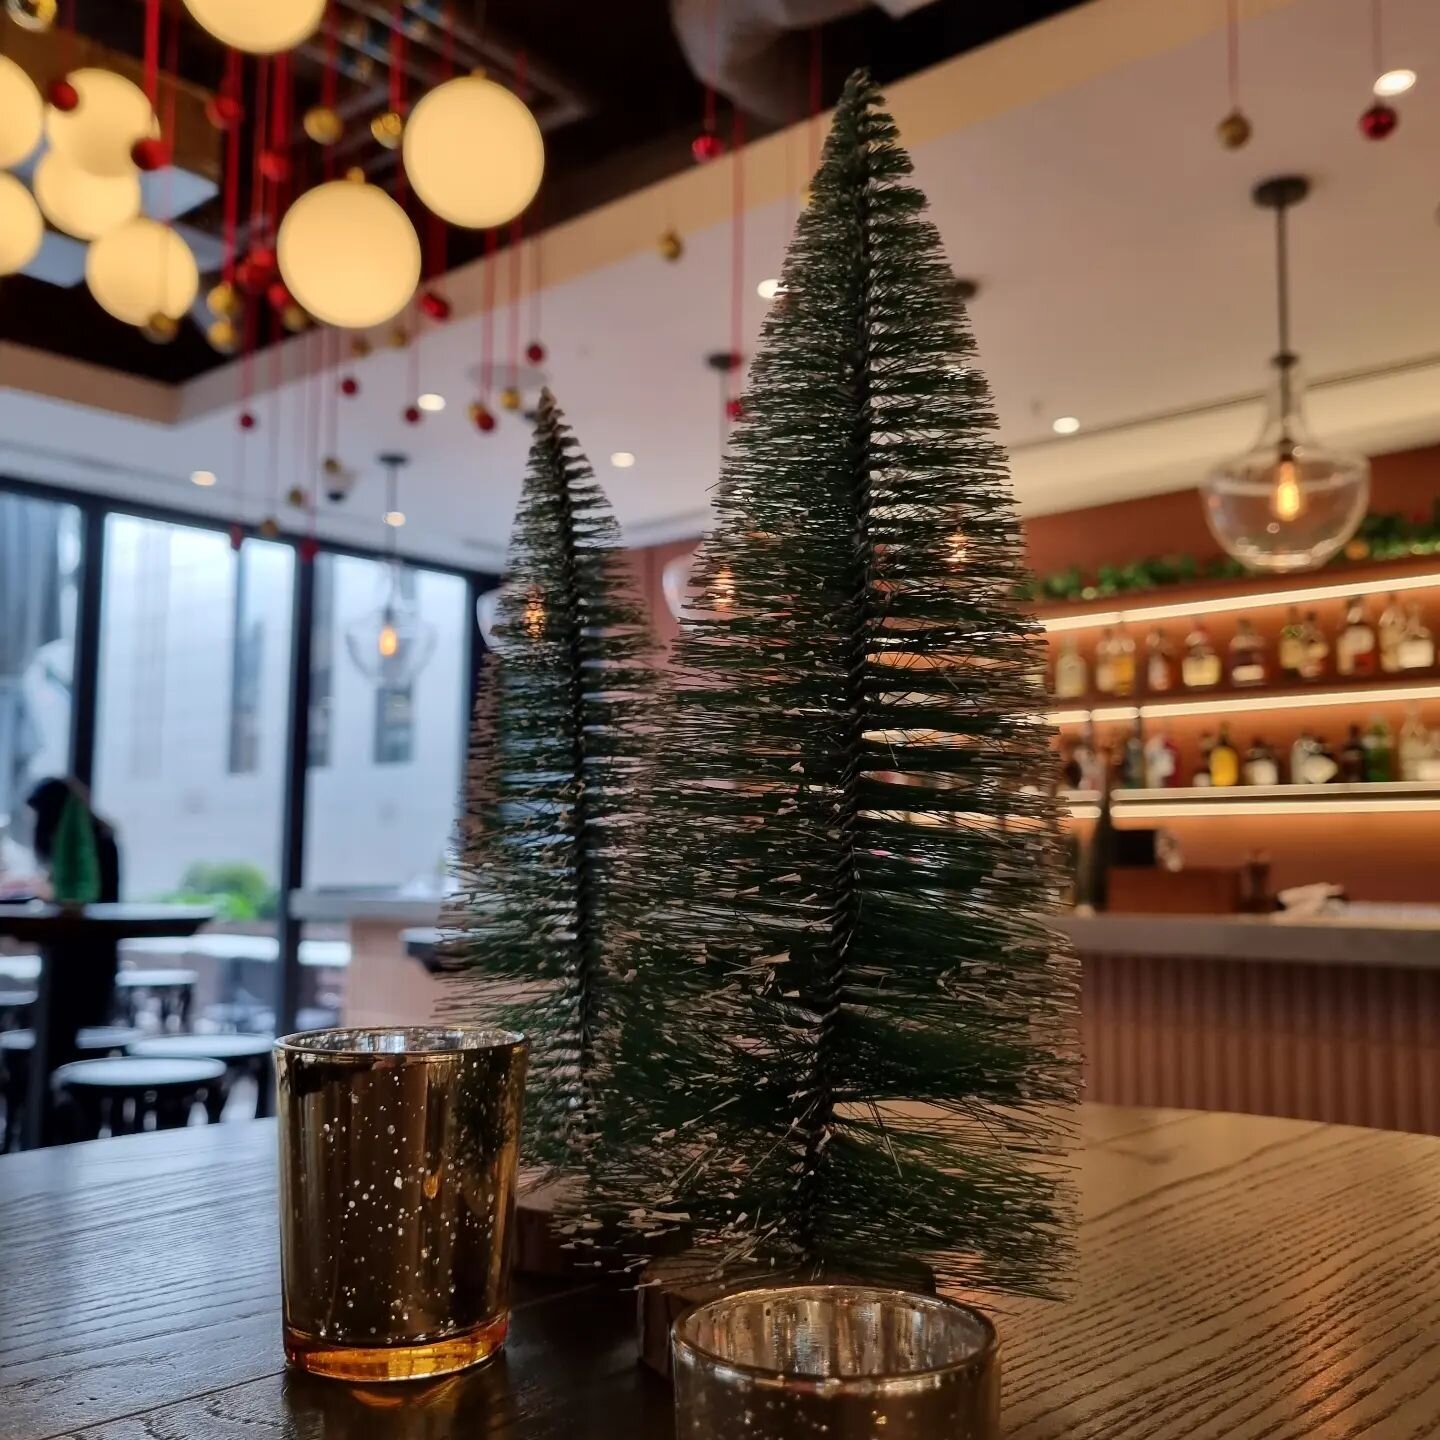 December is almost here and Revolve is the perfect place to celebrate the festive season. Click the link in our bio to speak to our team about booking a space, or simply drop in for a winter warmer. #festiveseason #itsbeginningtolookalotlikechristmas